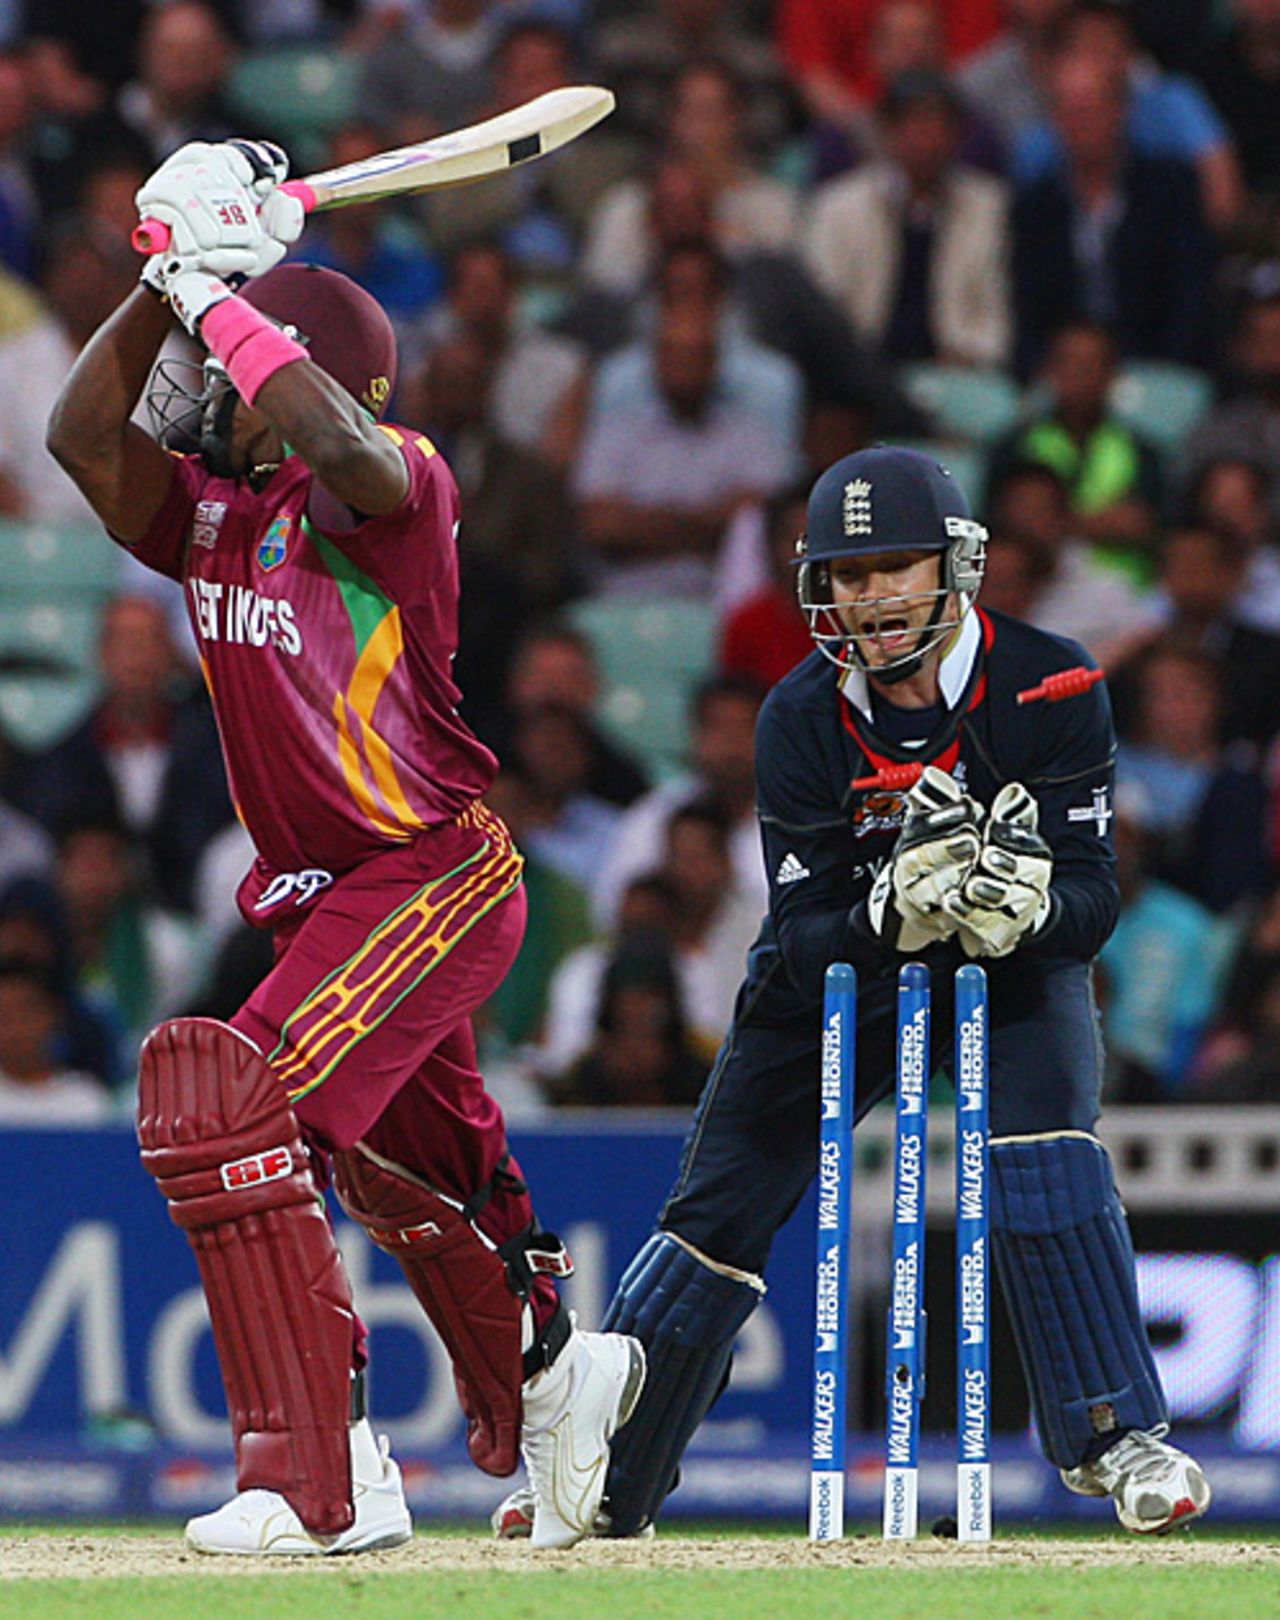 James Foster pulls off his second outstanding stumping in two days, this time to dismiss Dwayne Bravo, ICC World Twenty20, The Oval, June 15, 2009